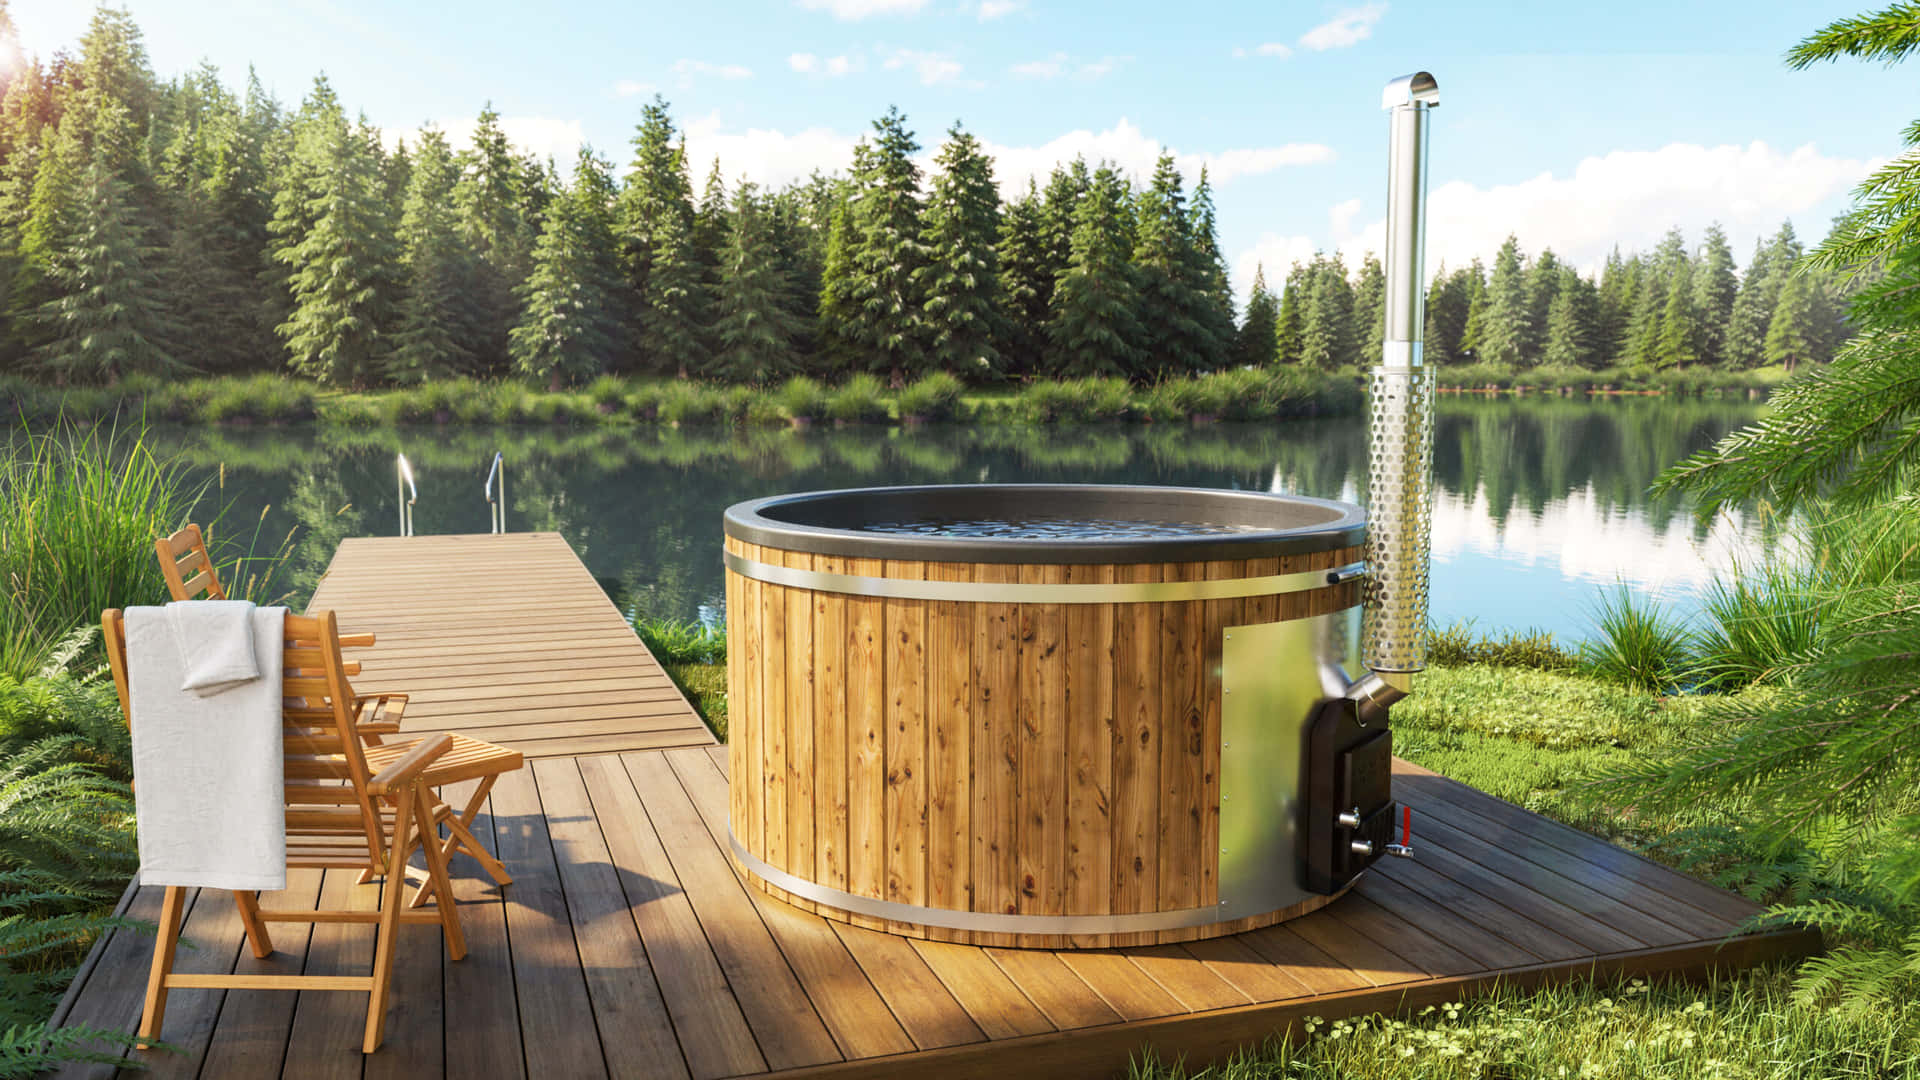 Lakeside Wooden Hot Tub Relaxation Wallpaper